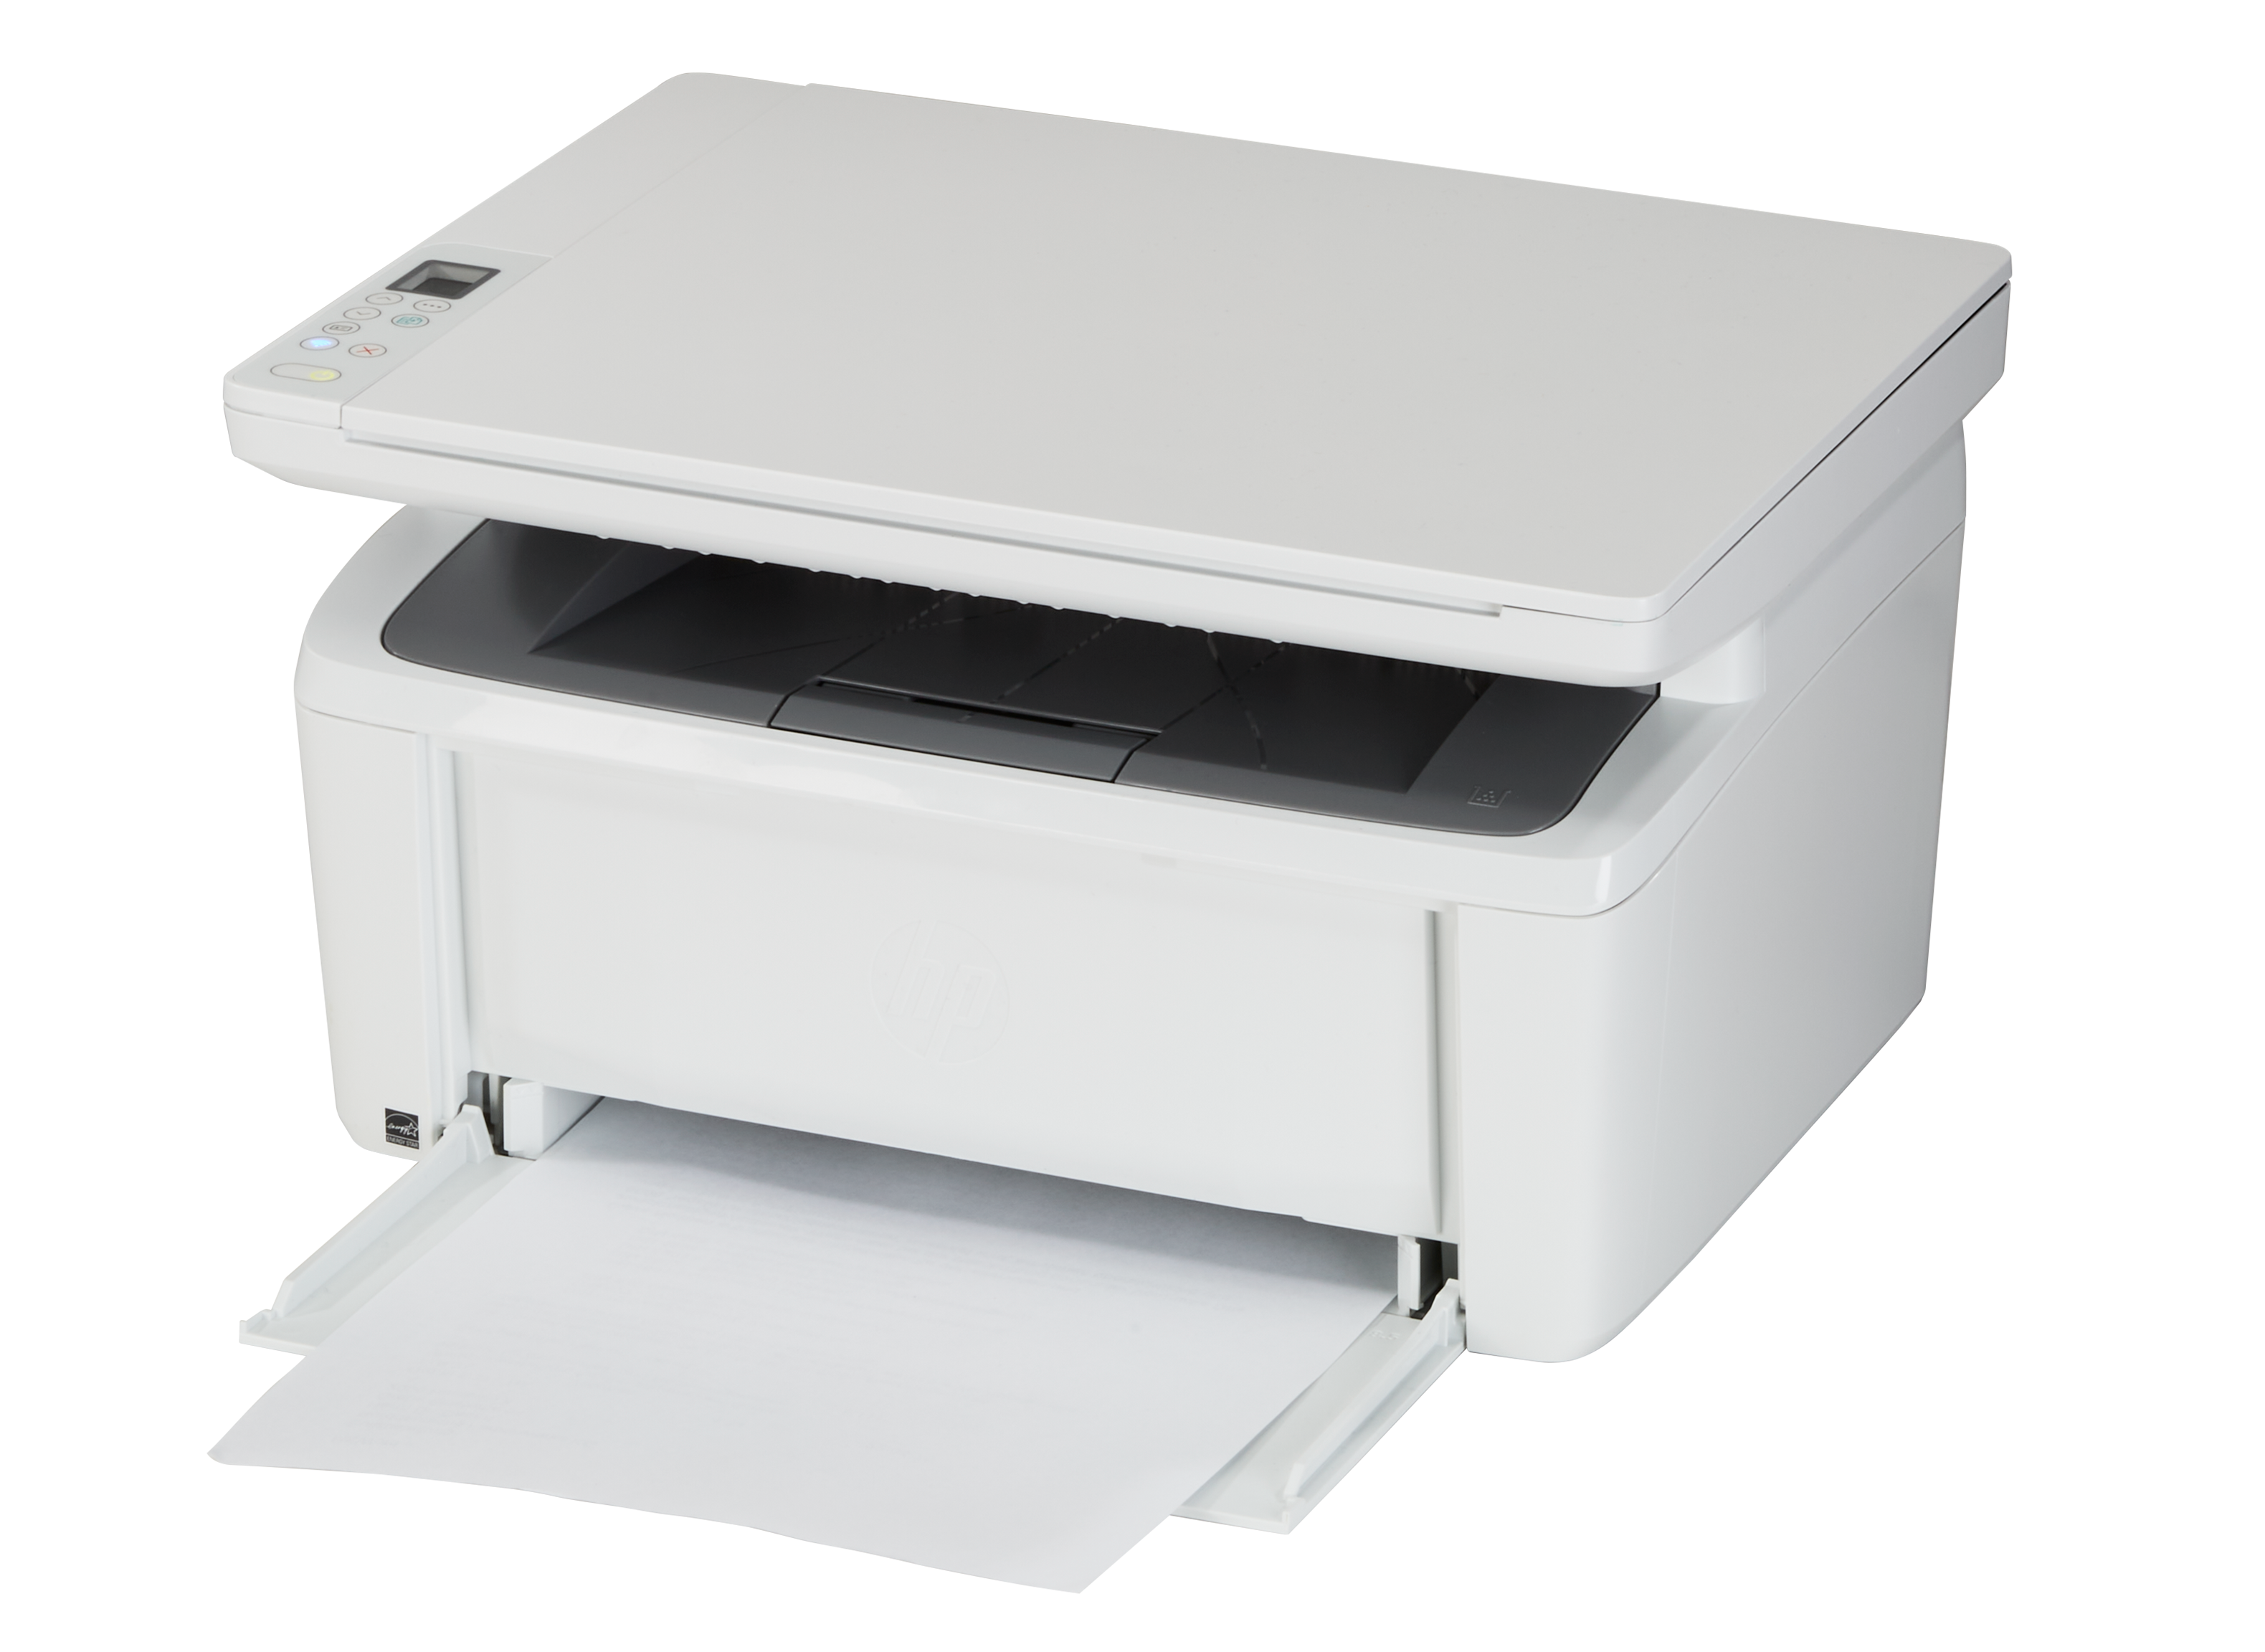 https://crdms.images.consumerreports.org/prod/products/cr/models/405780-all-in-one-black-and-white-laser-printers-hp-laserjet-mfp-m140we-10028966.png